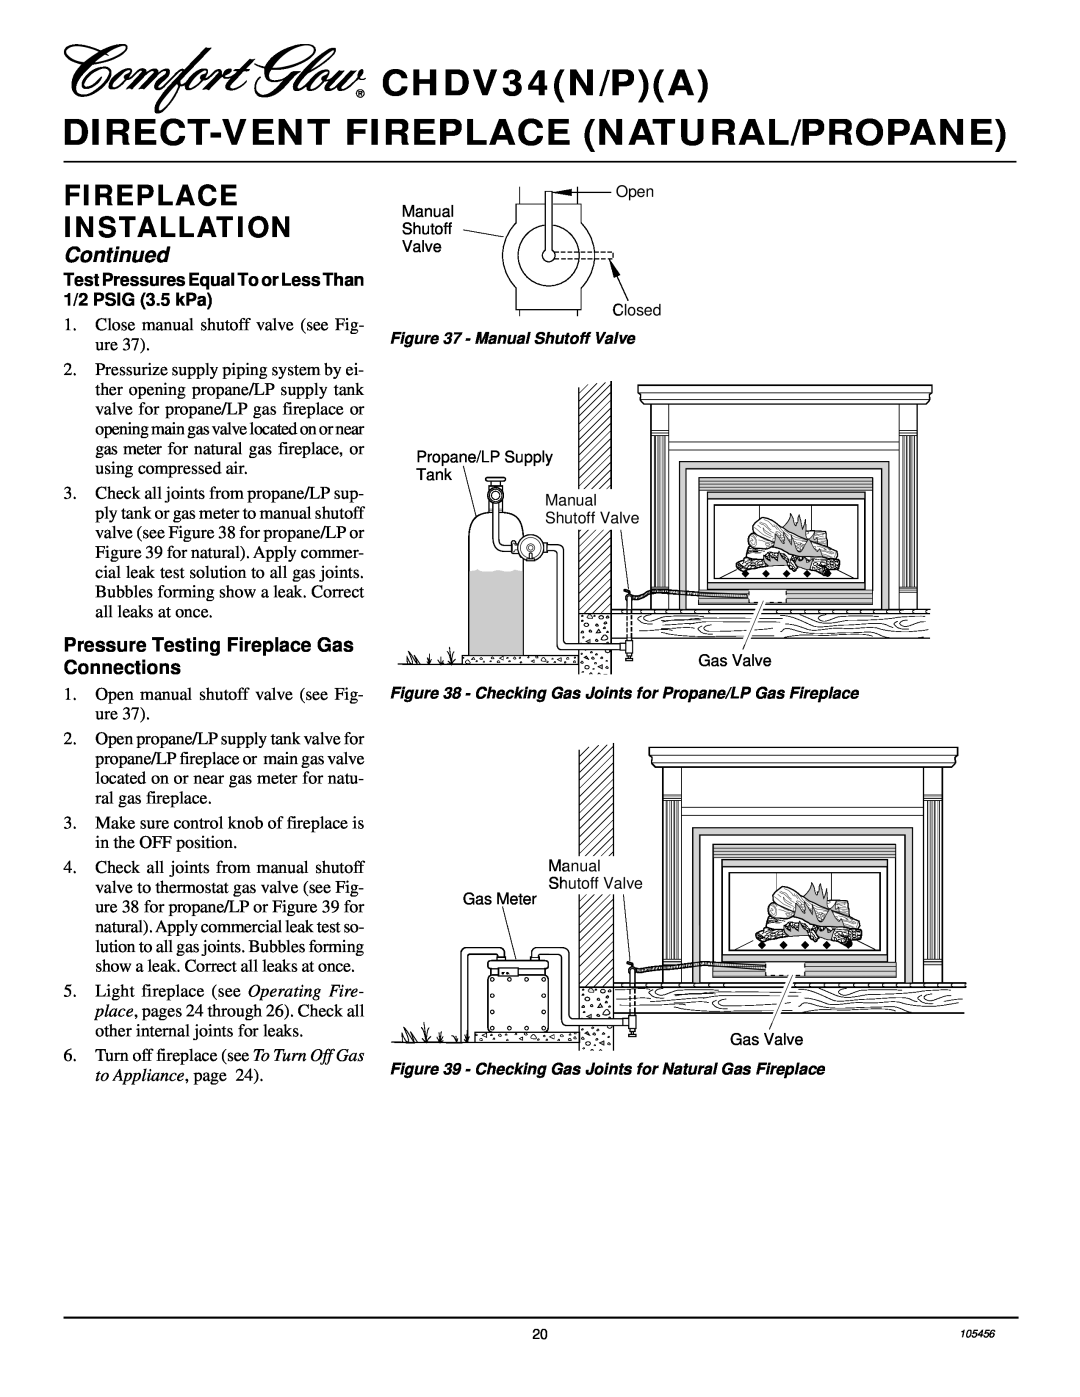 Desa CHDV34(N/P)(A) Pressure Testing Fireplace Gas Connections, CHDV34N/PA DIRECT-VENTFIREPLACE NATURAL/PROPANE, Continued 